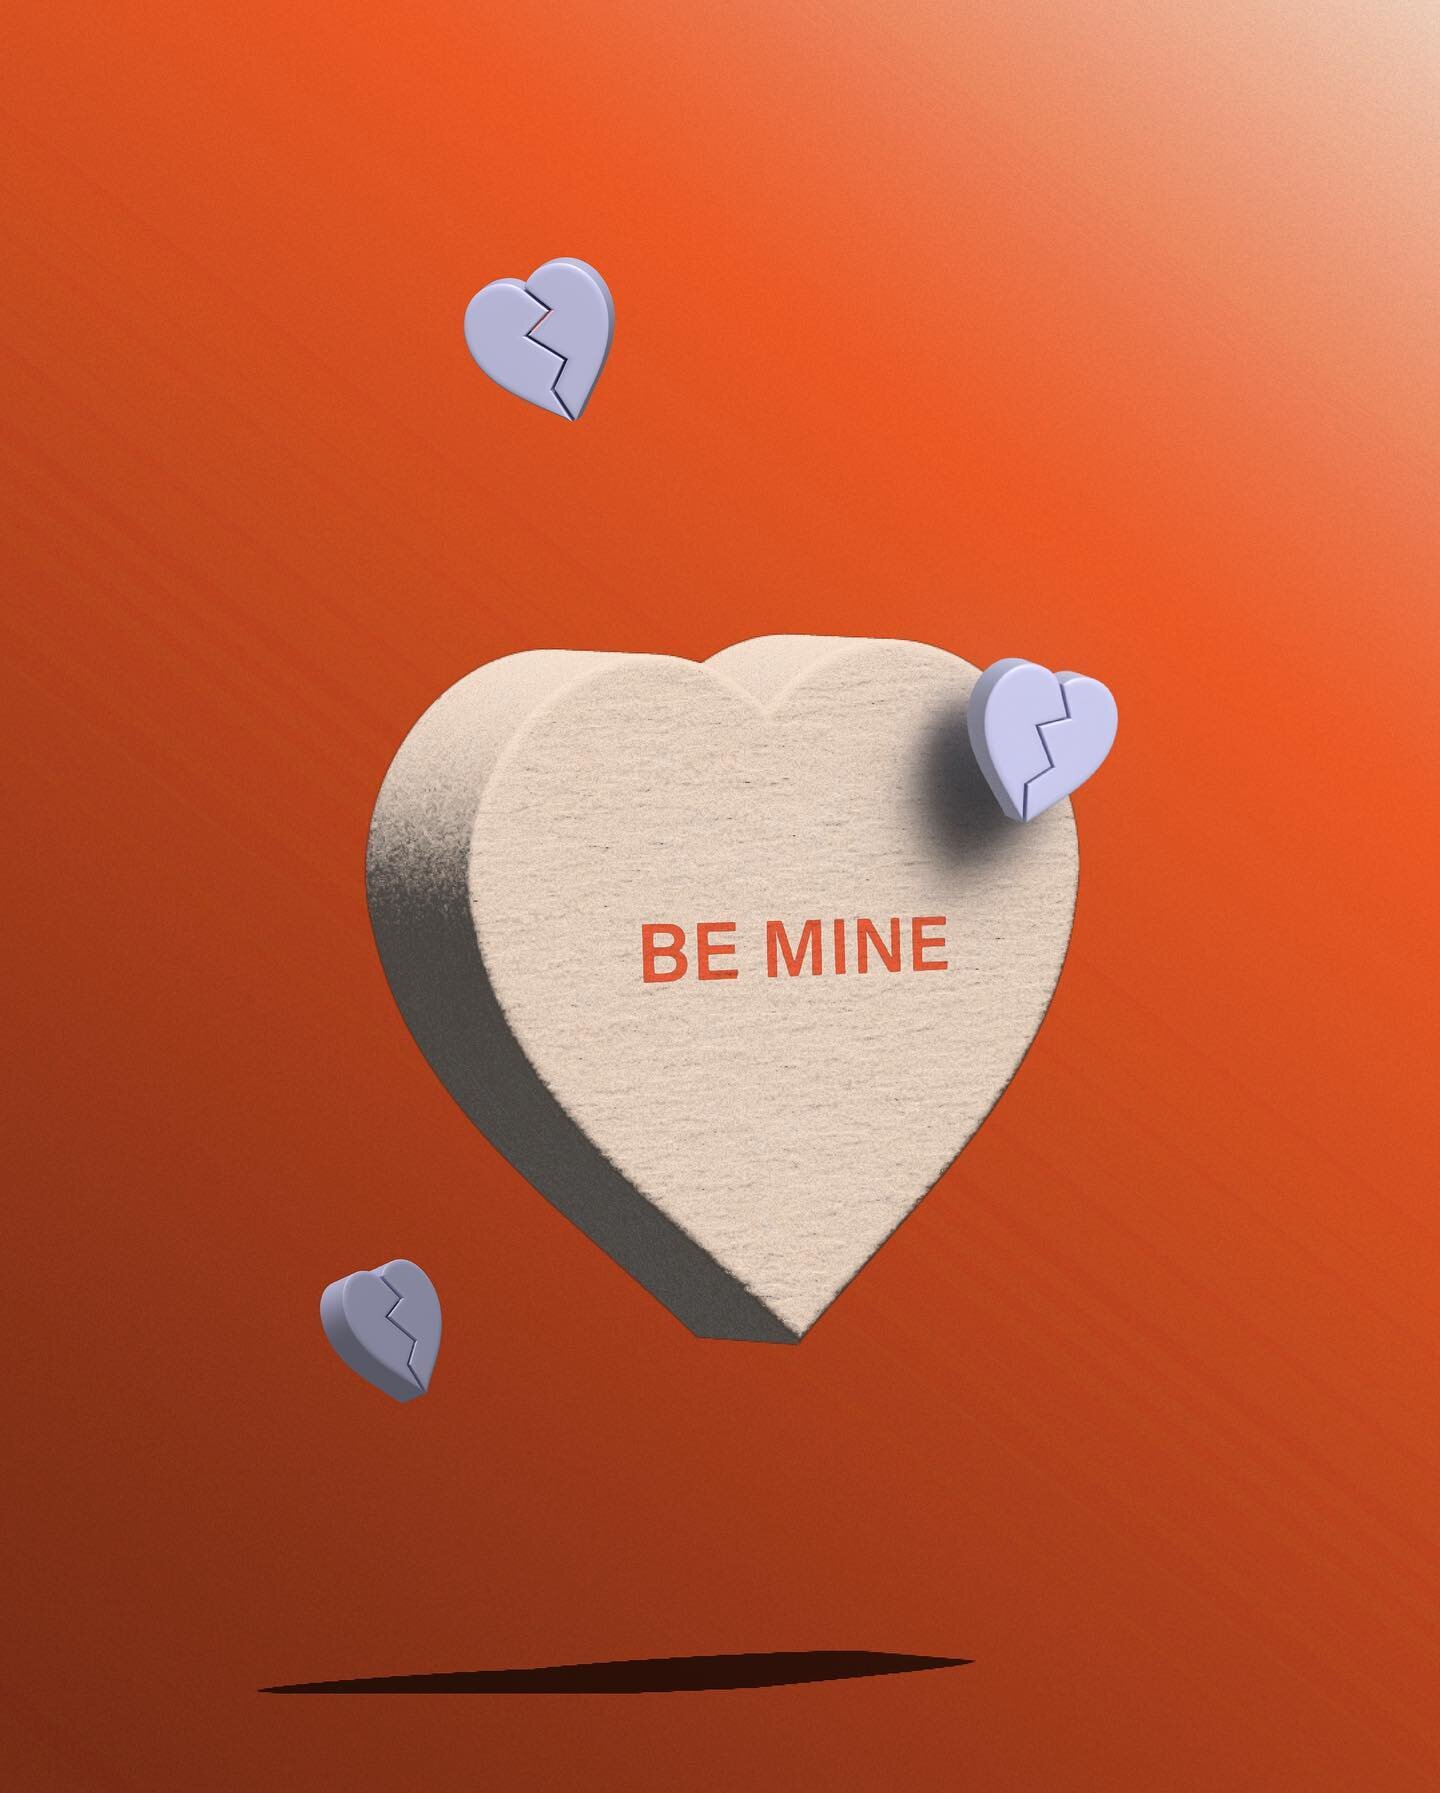 Happy Valentines my friends 💘 enjoy this 3D graphic as a token of my appreciation!